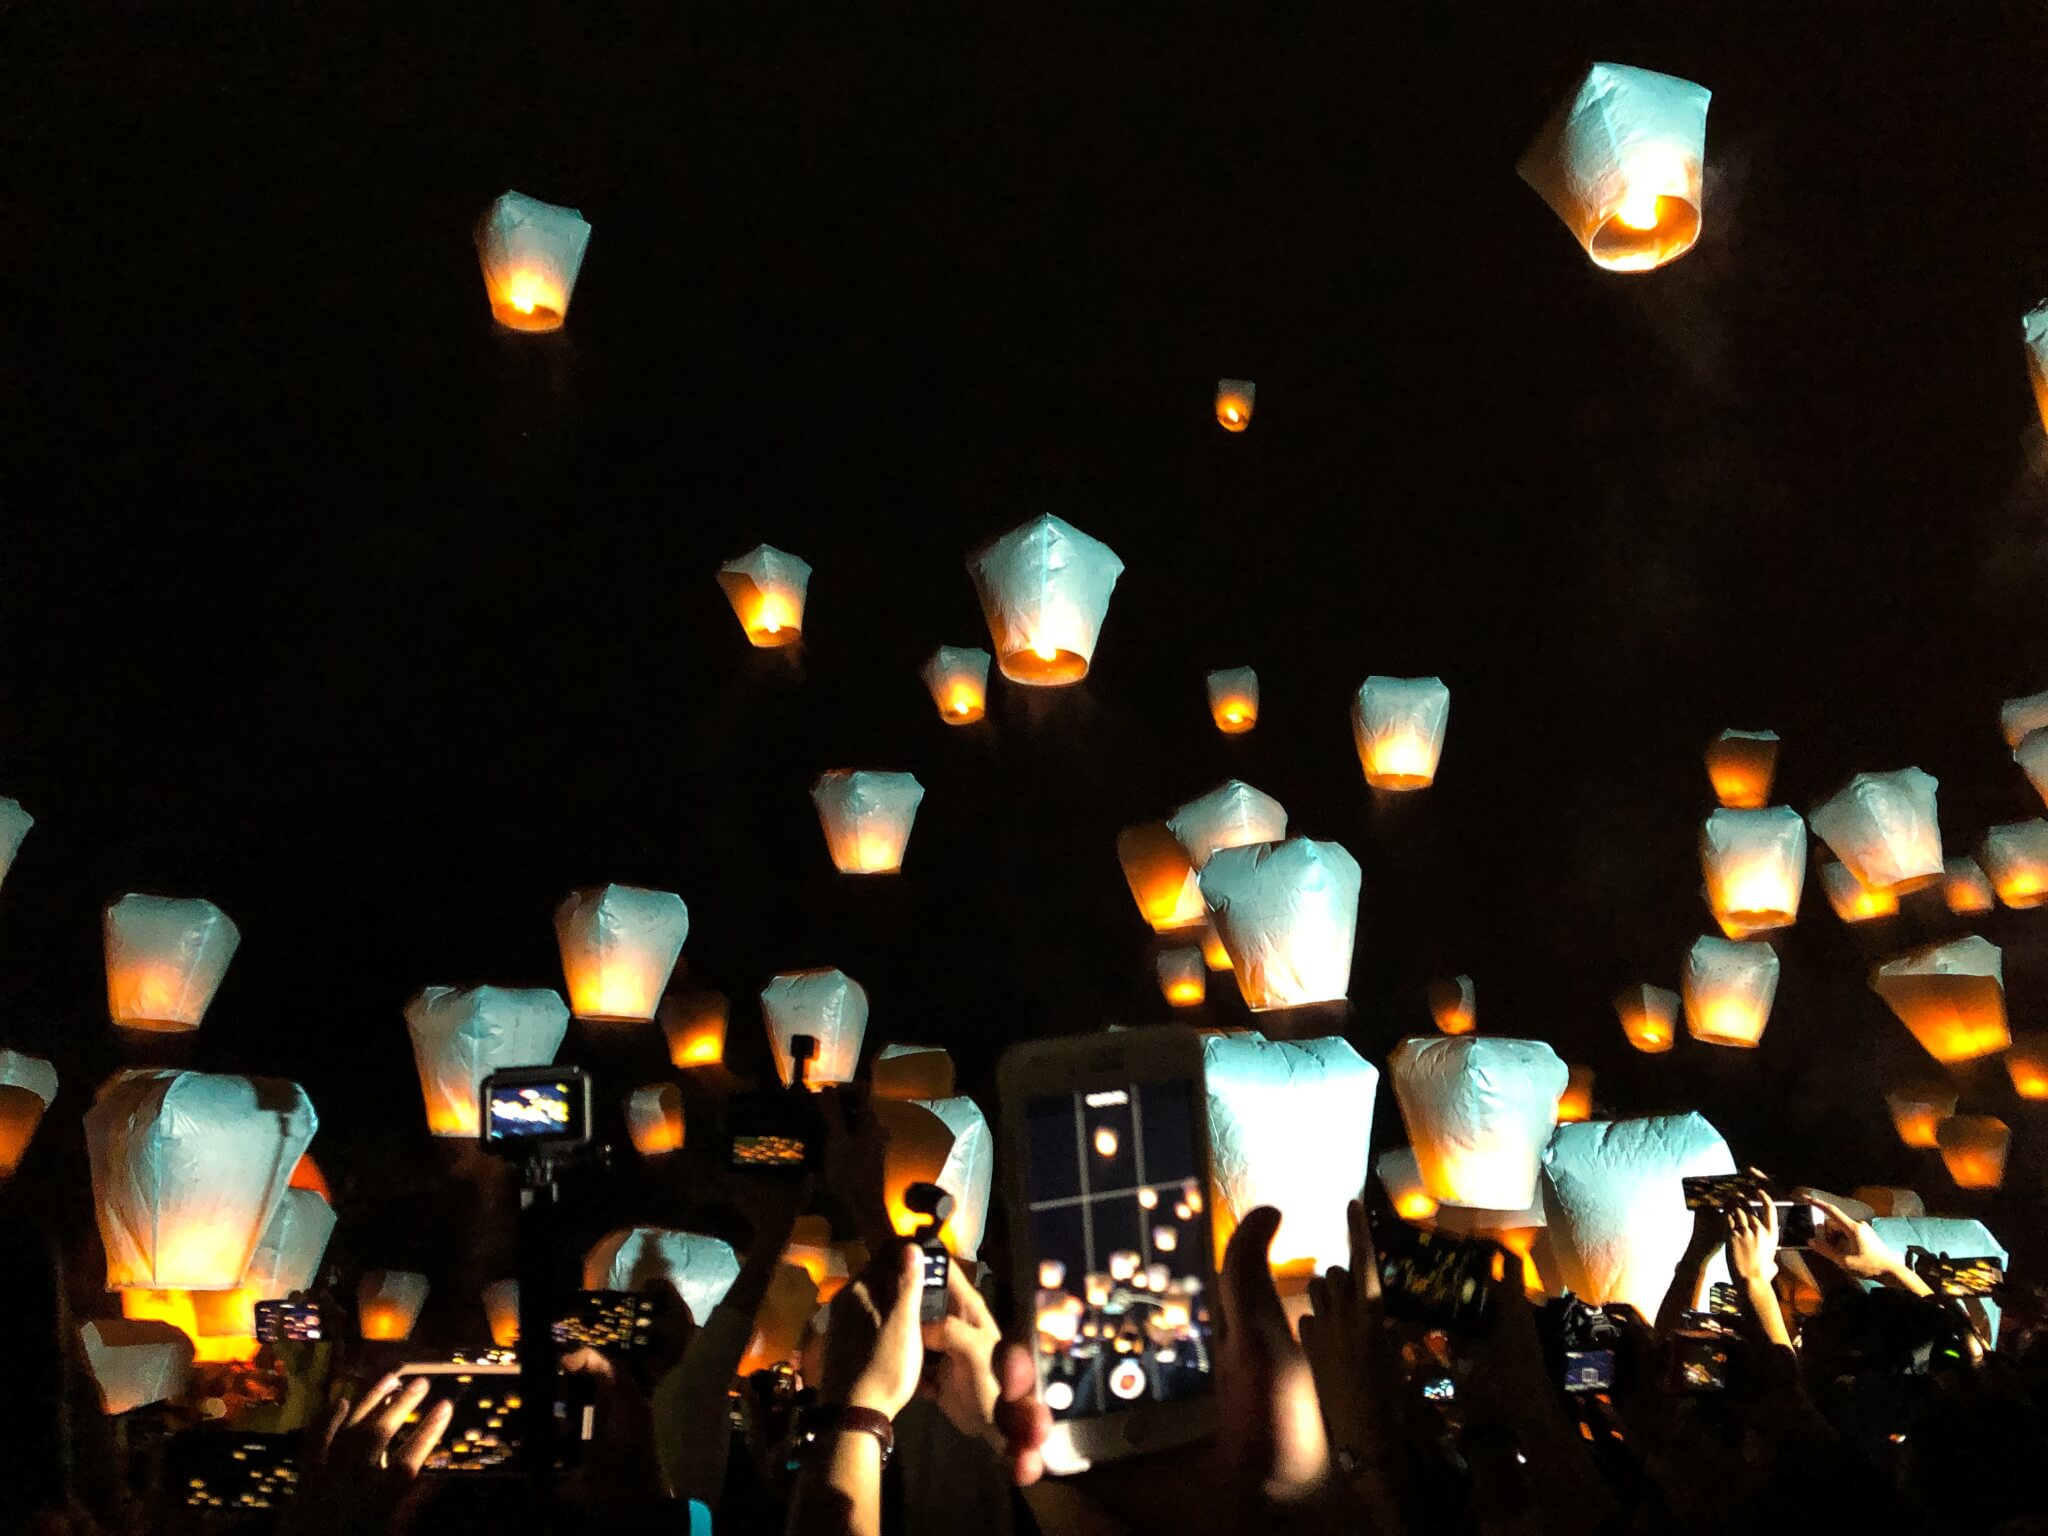 The Chinese Lantern Festival might be the most beautiful holiday